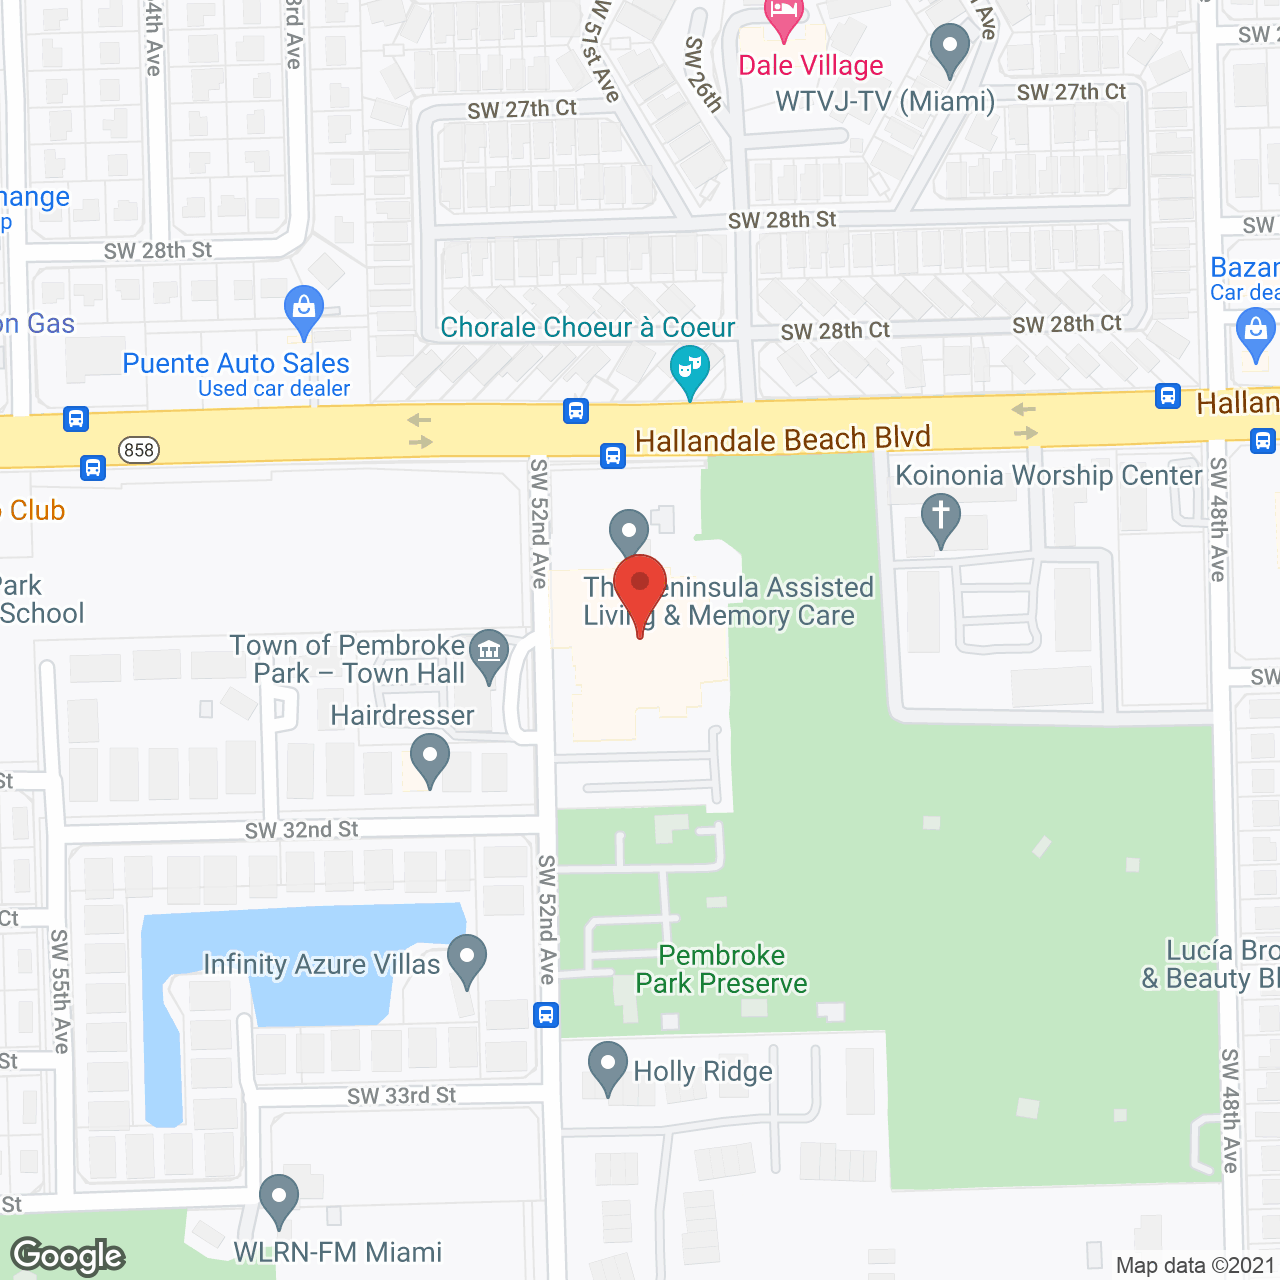 The Peninsula Assisted Living and Memory Care in google map